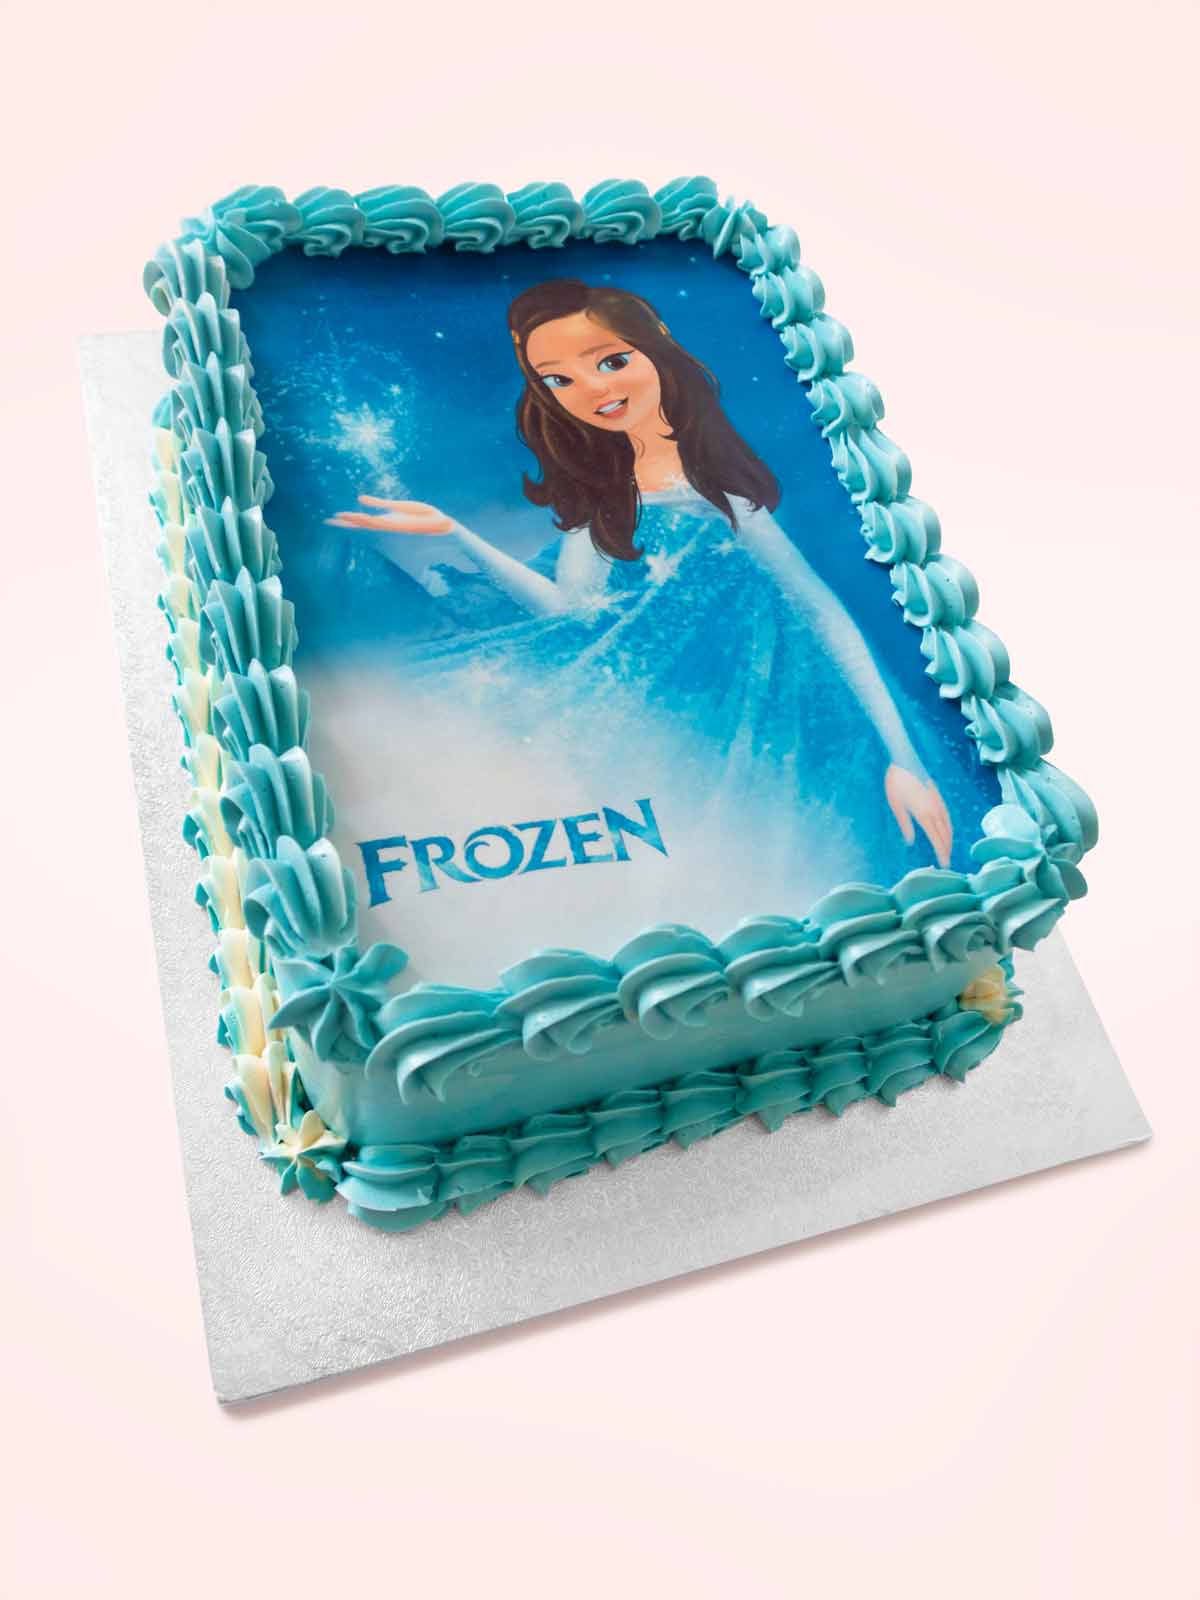 Personalised Frozen Cake Delivery London Surrey Berkshire